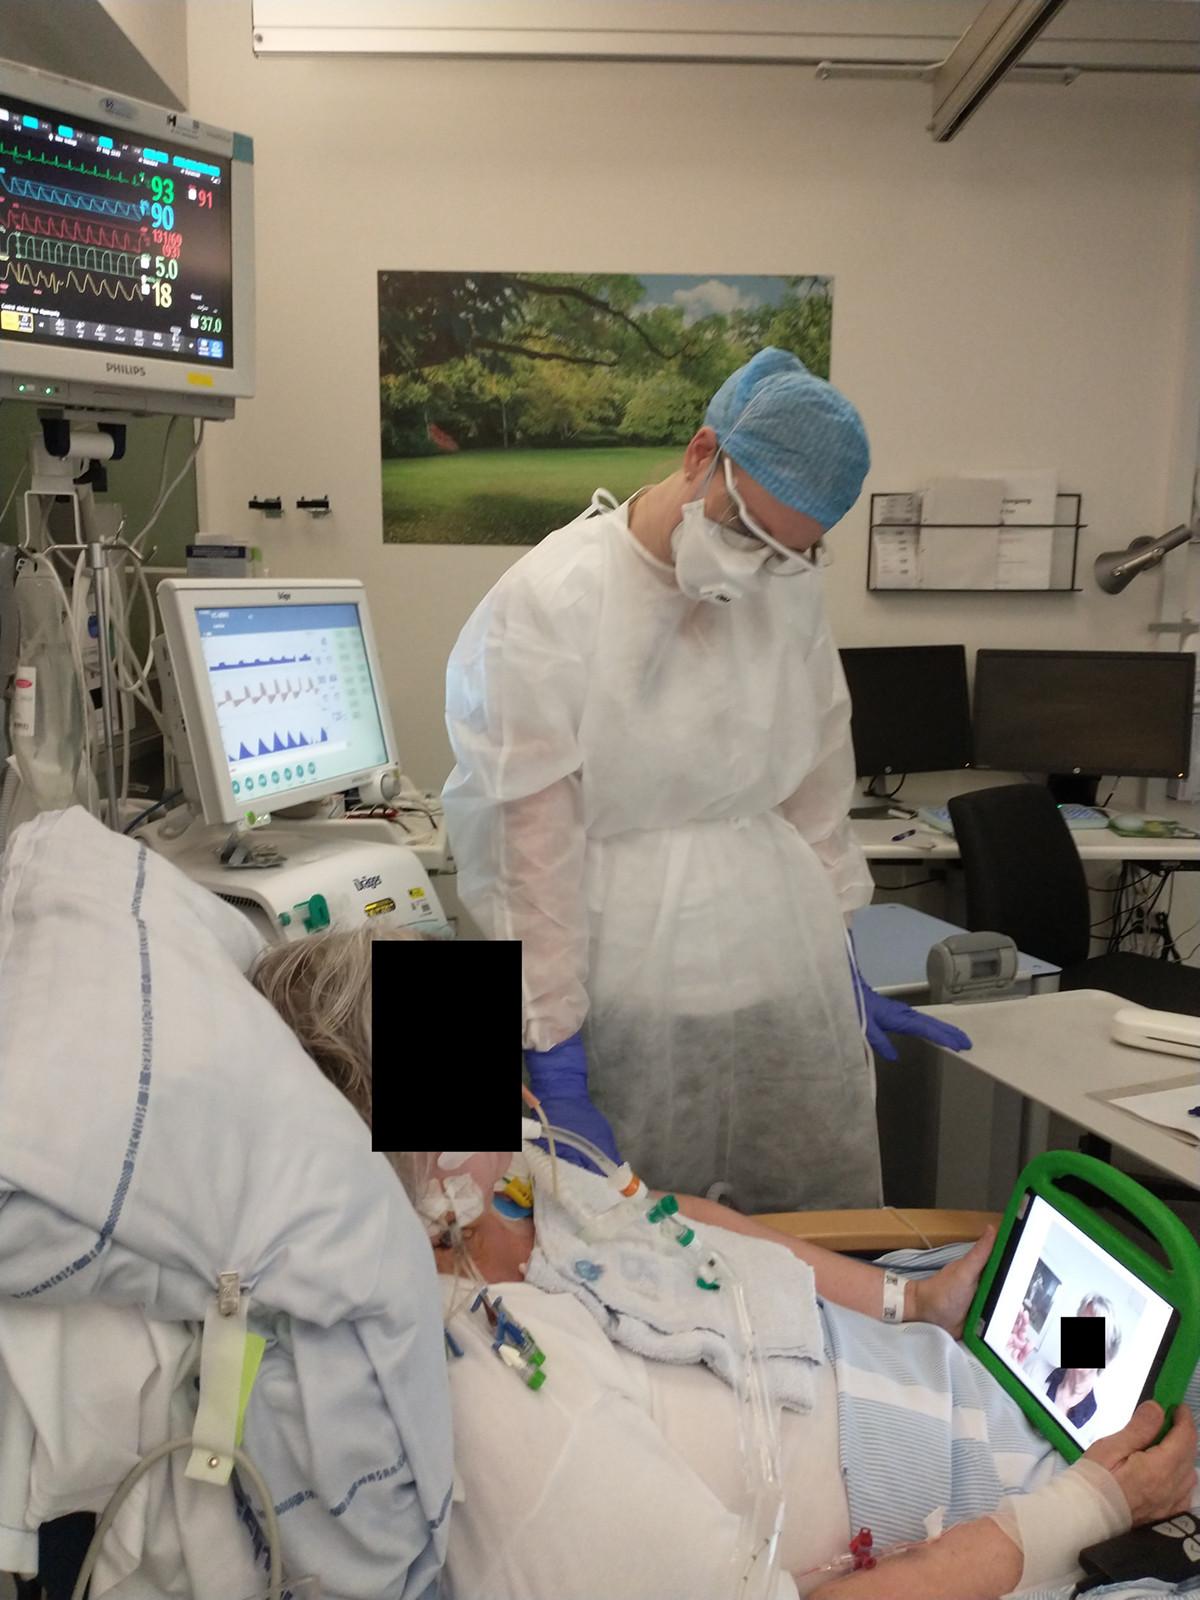 Patient making a video call in the intensive care unit.